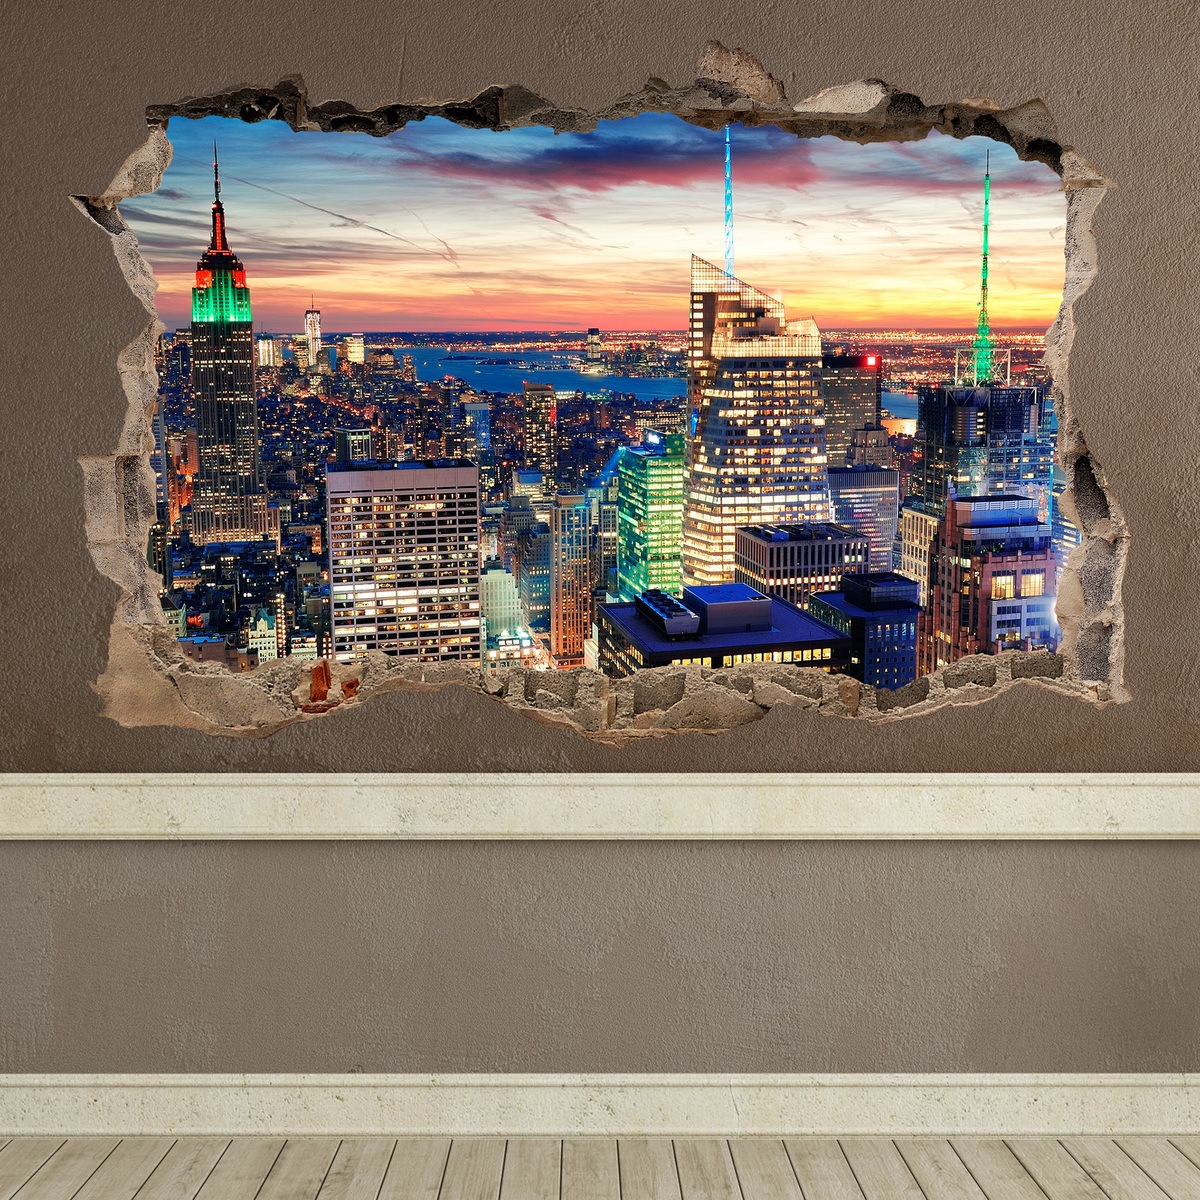 Wall Stickers: Hole New York at nigh 4